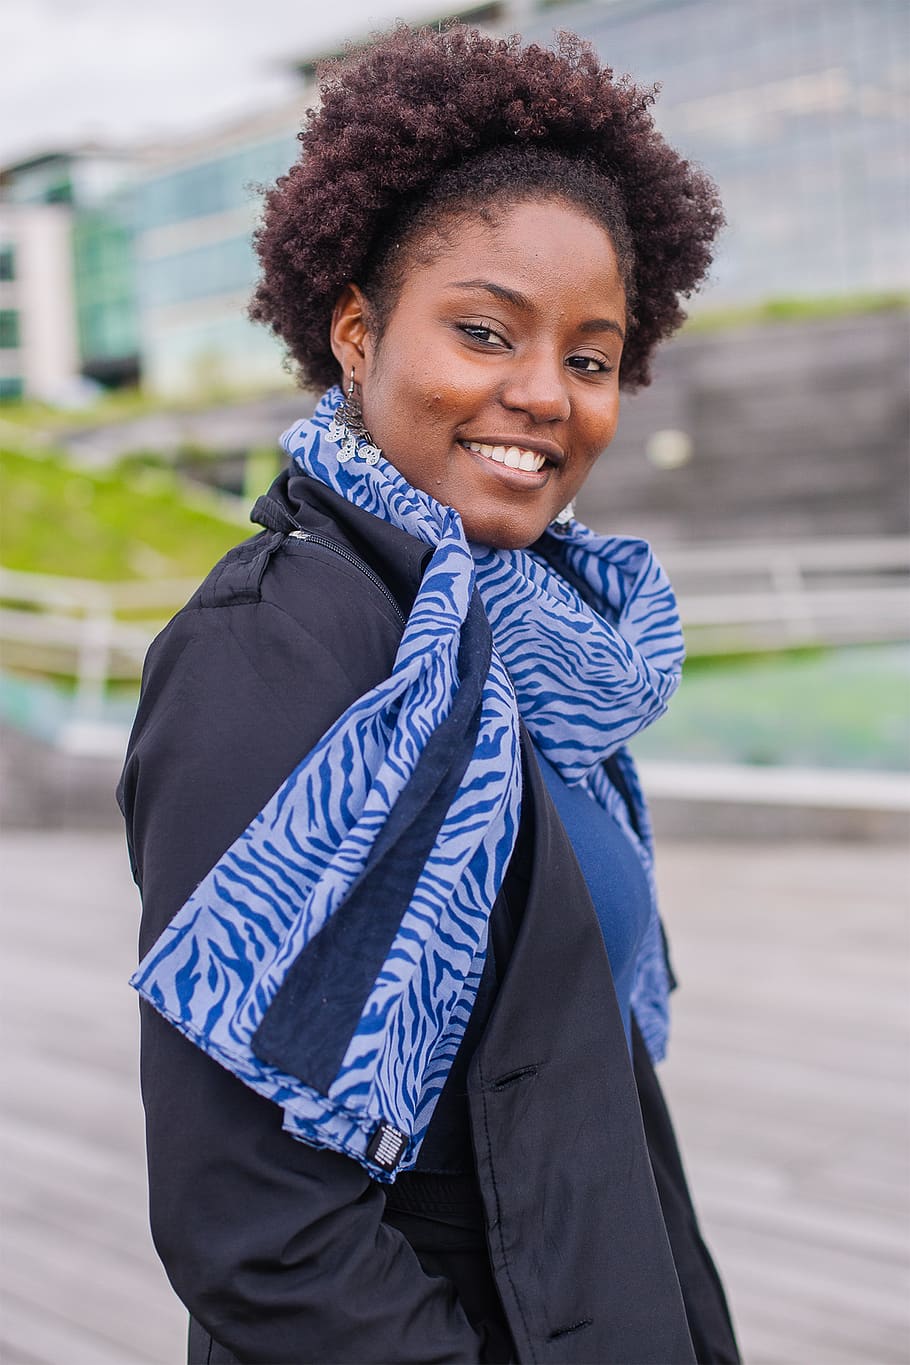 Smiling Woman Wearing Coat and Scarf Standing Near Building, afro, HD wallpaper